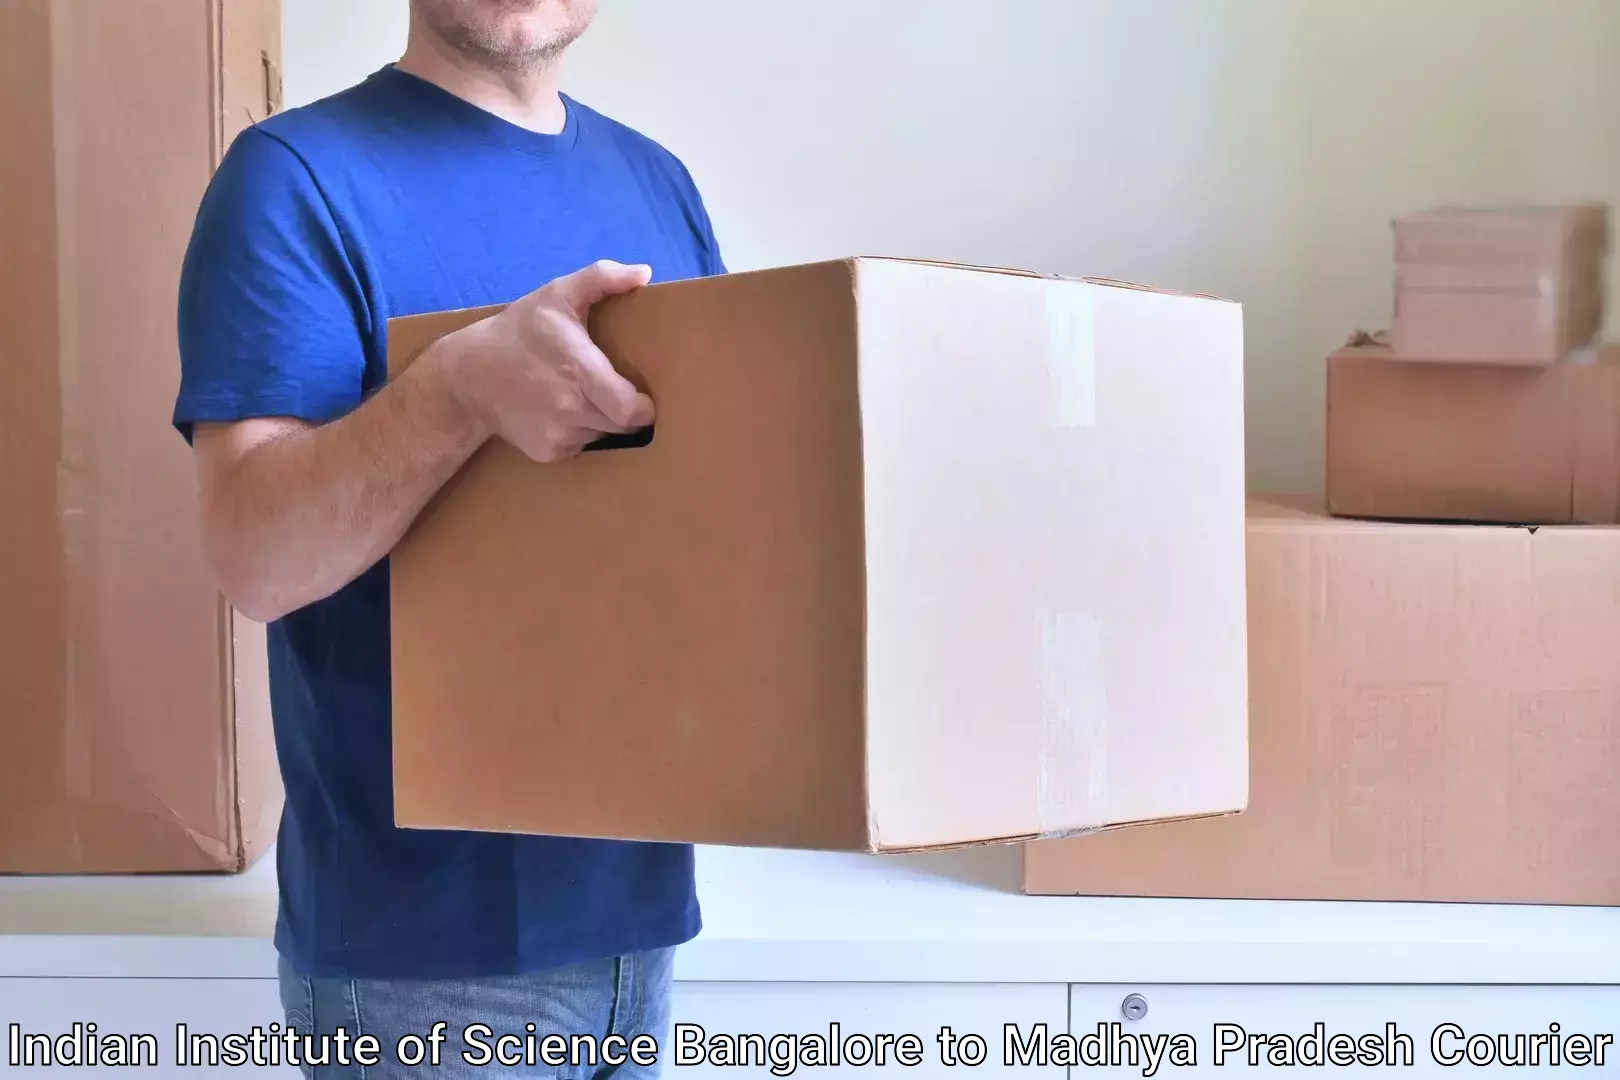 Professional courier handling Indian Institute of Science Bangalore to Madhya Pradesh